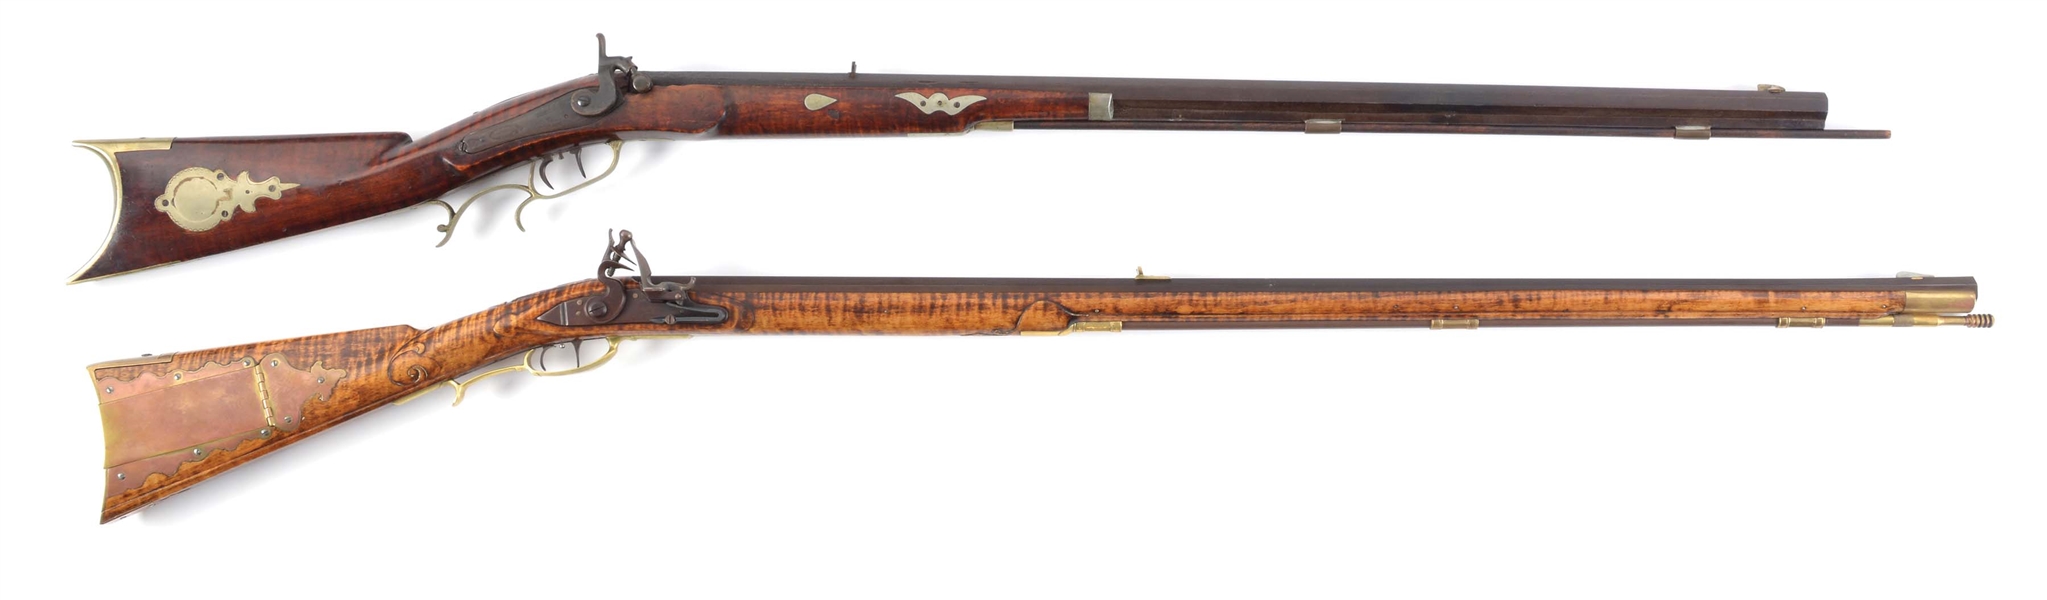 (A) LOT OF TWO: FISHER PERCUSSION .36 CALIBER LONG RIFLE AND CONTEMPORARY FLINTLOCK .50 CALIBER RIFLE.